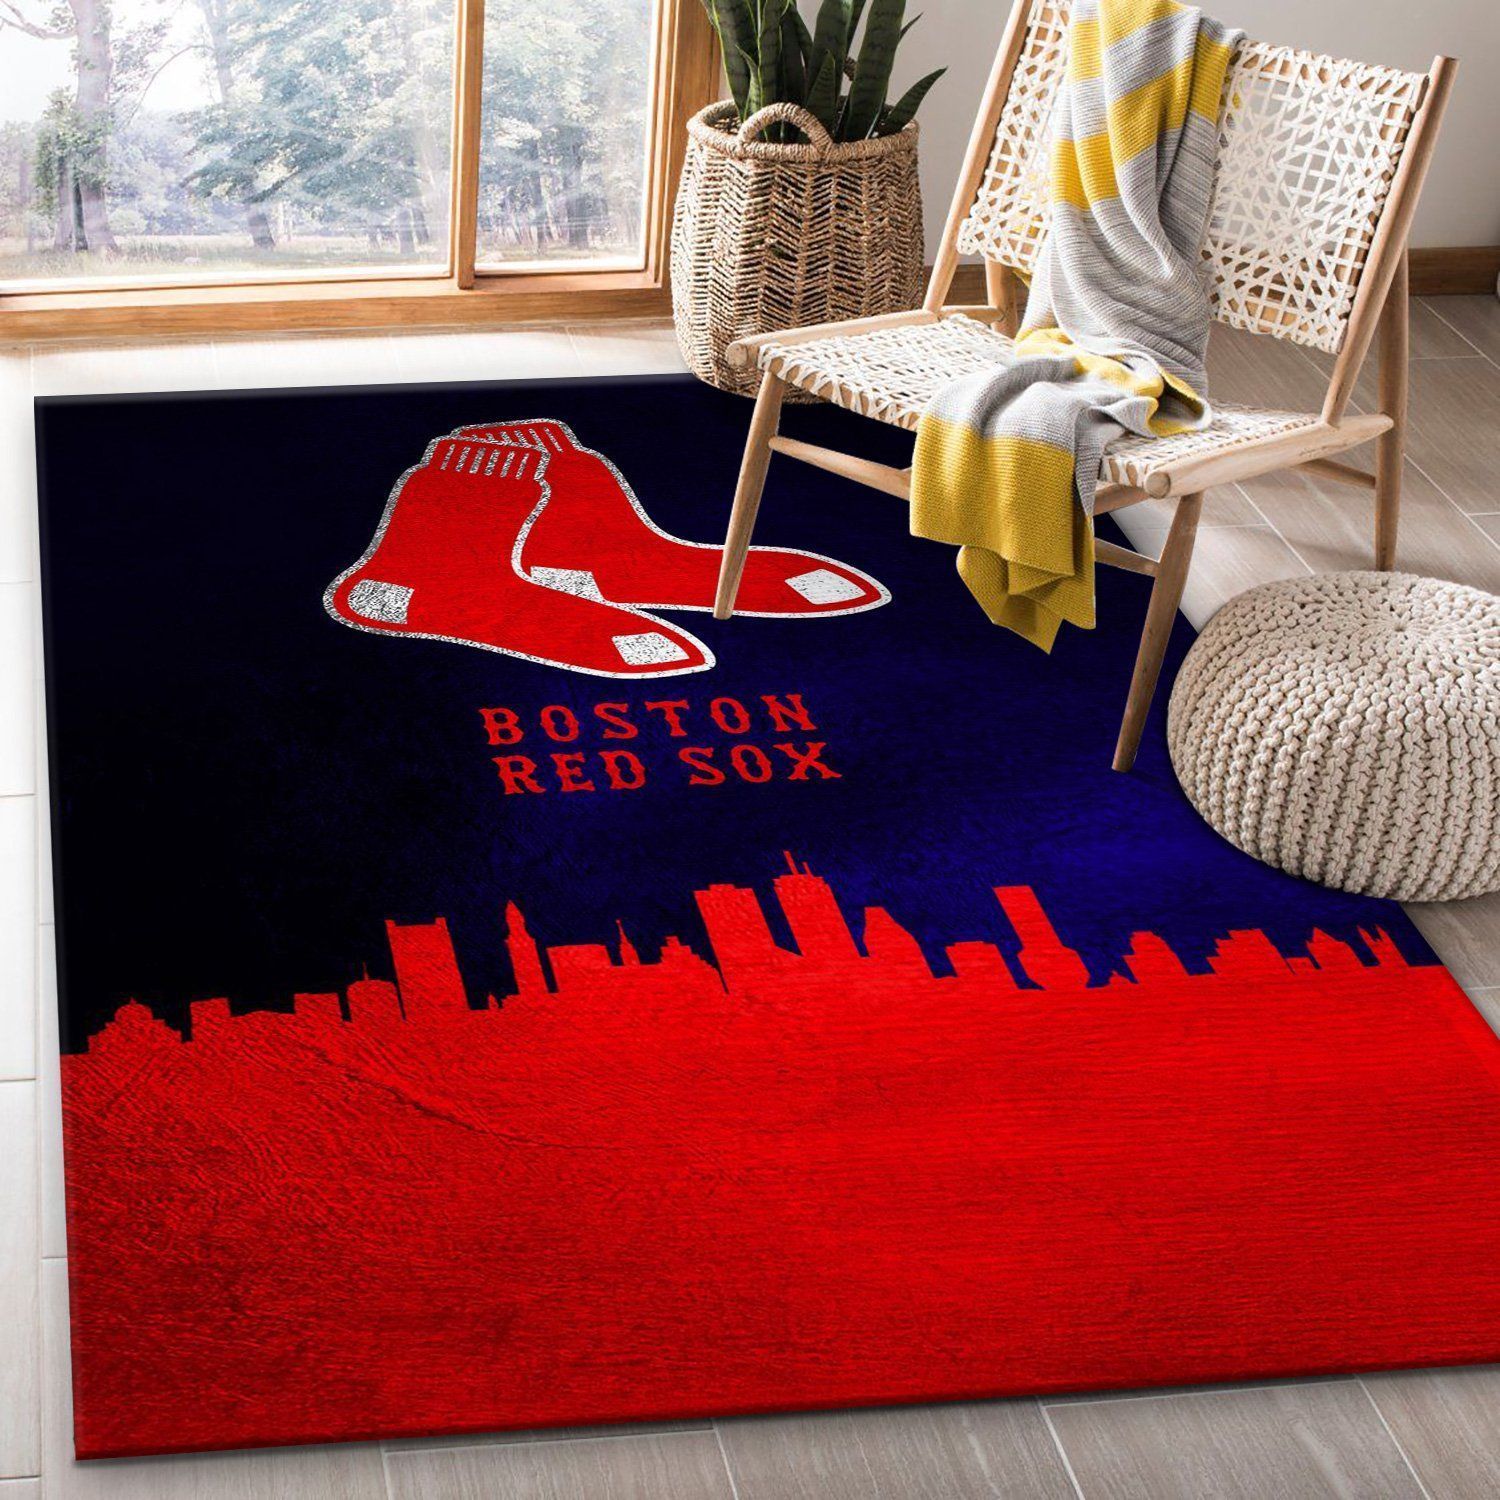 Boston Red Sox Skyline Area Rug For Christmas, Bedroom, Home US Decor - Indoor Outdoor Rugs